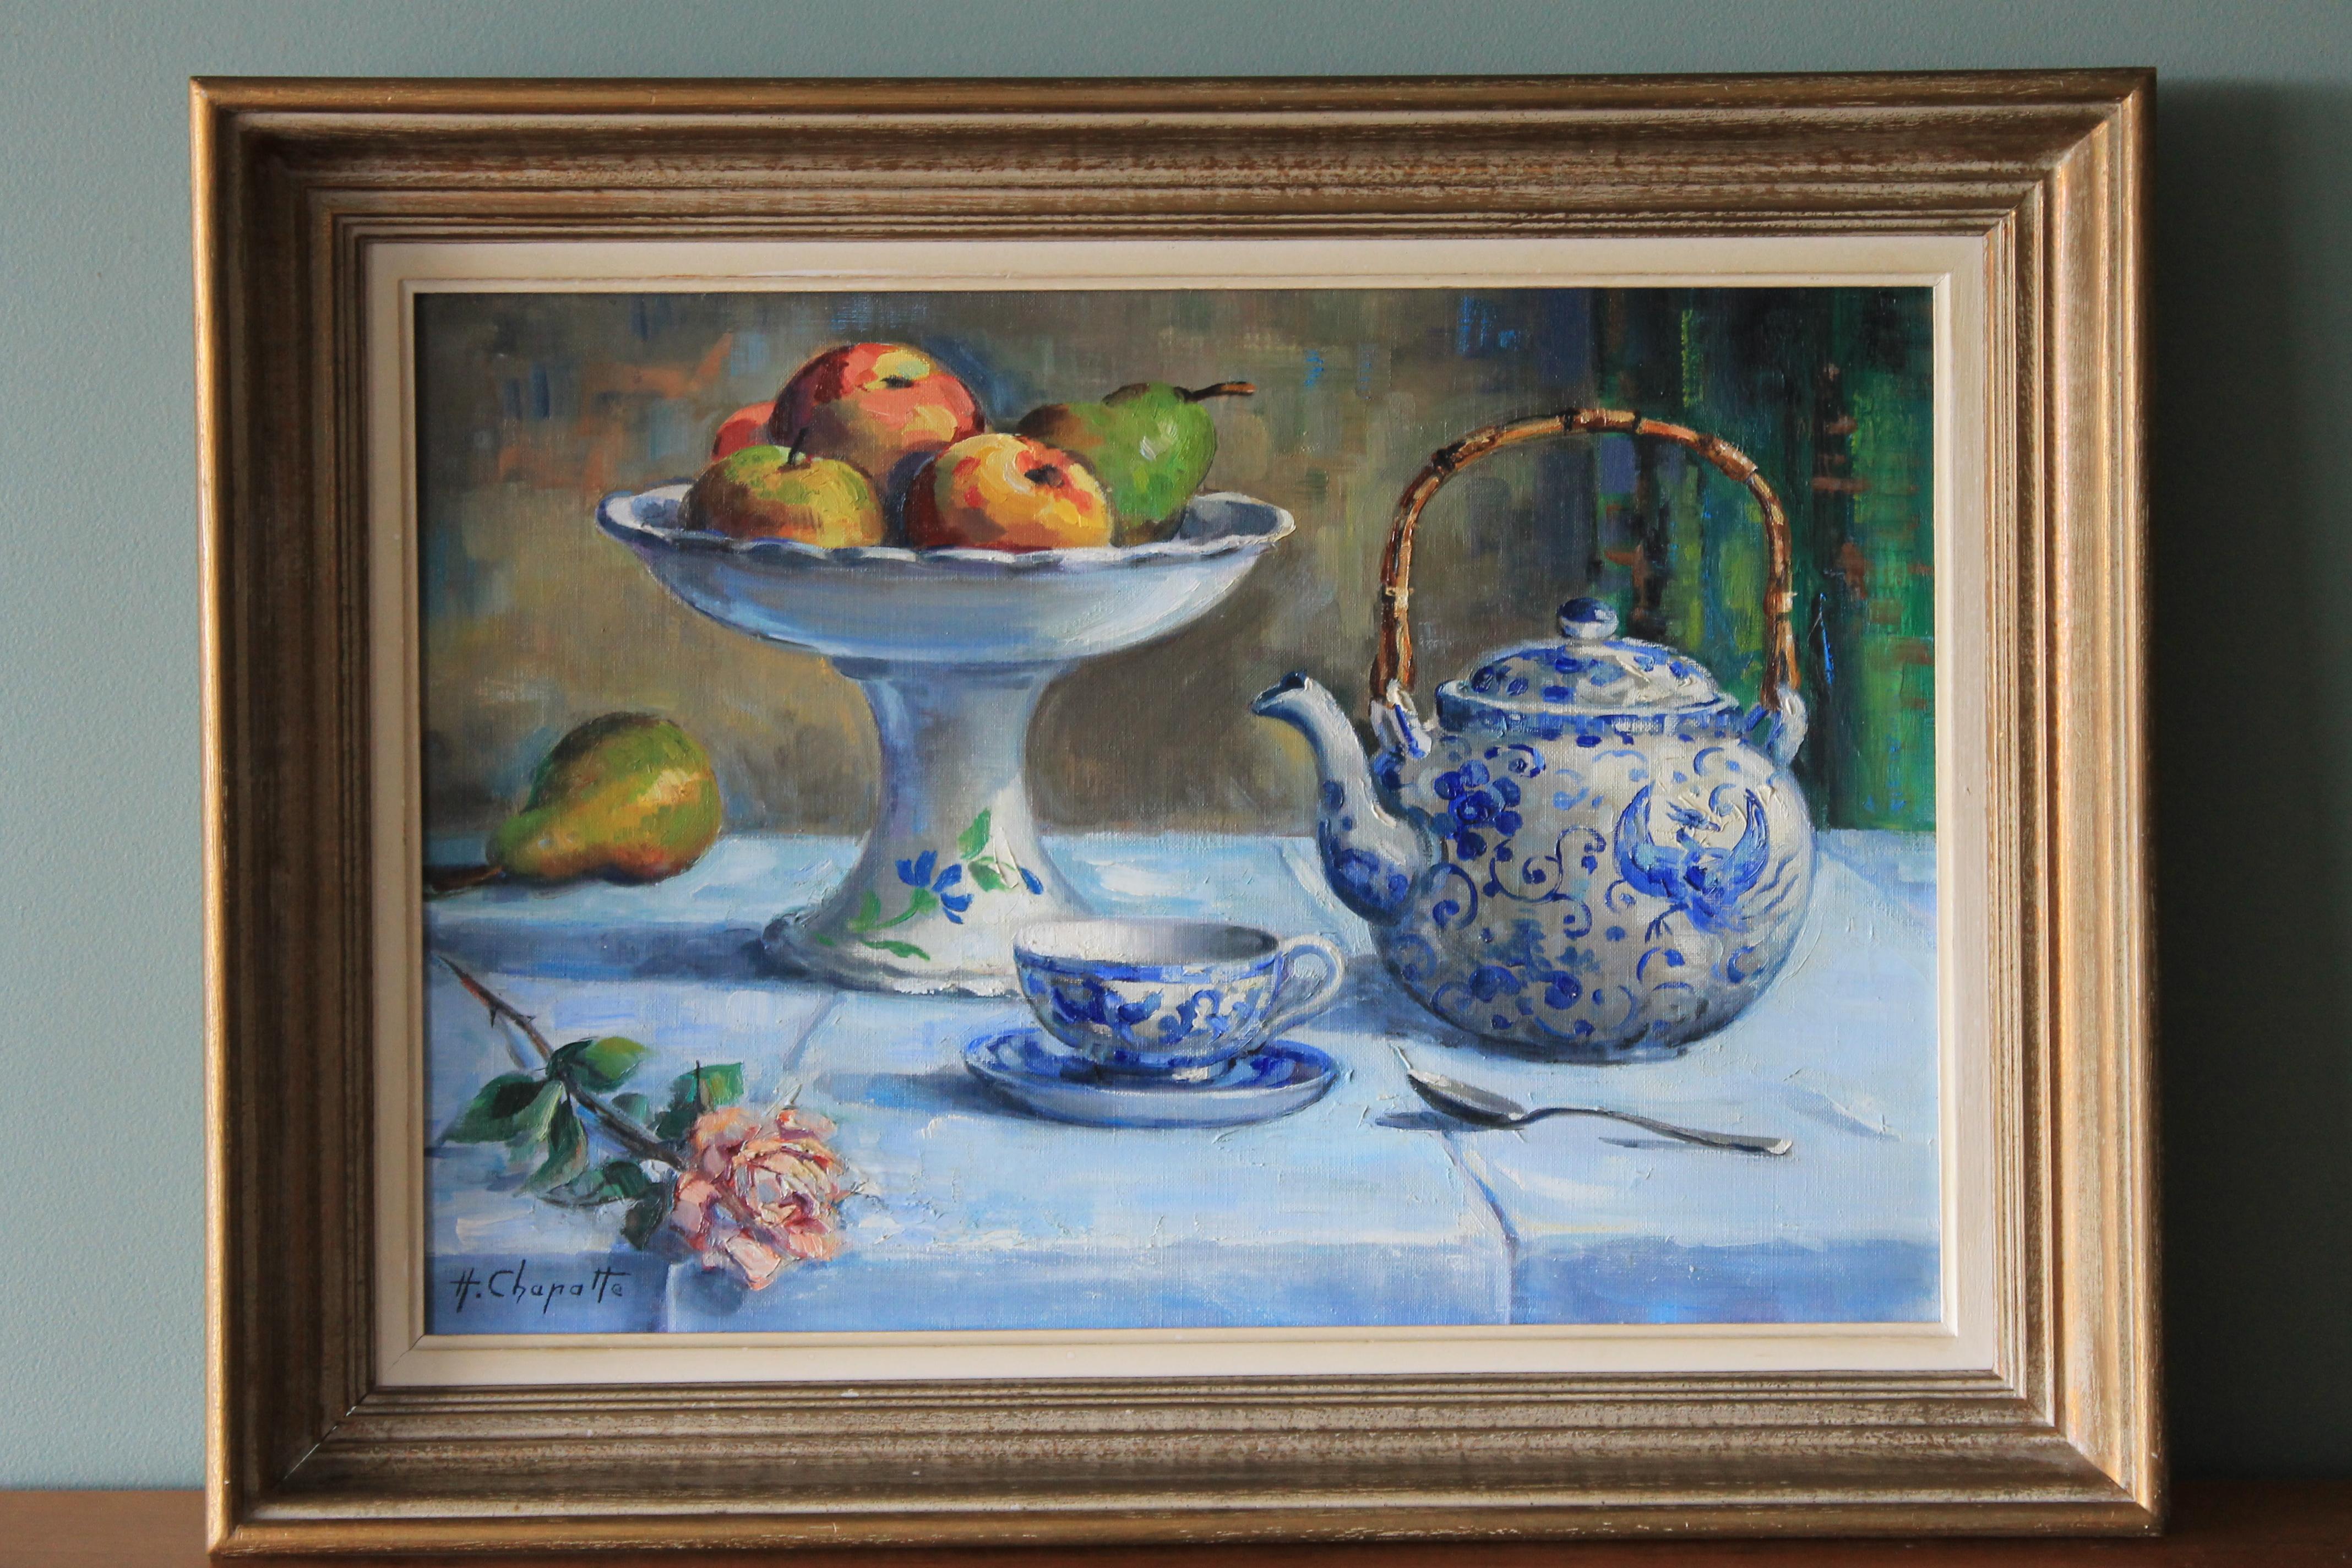 Vintage still life oil painting by French artist Henri Chapatte (1918-1997) 1